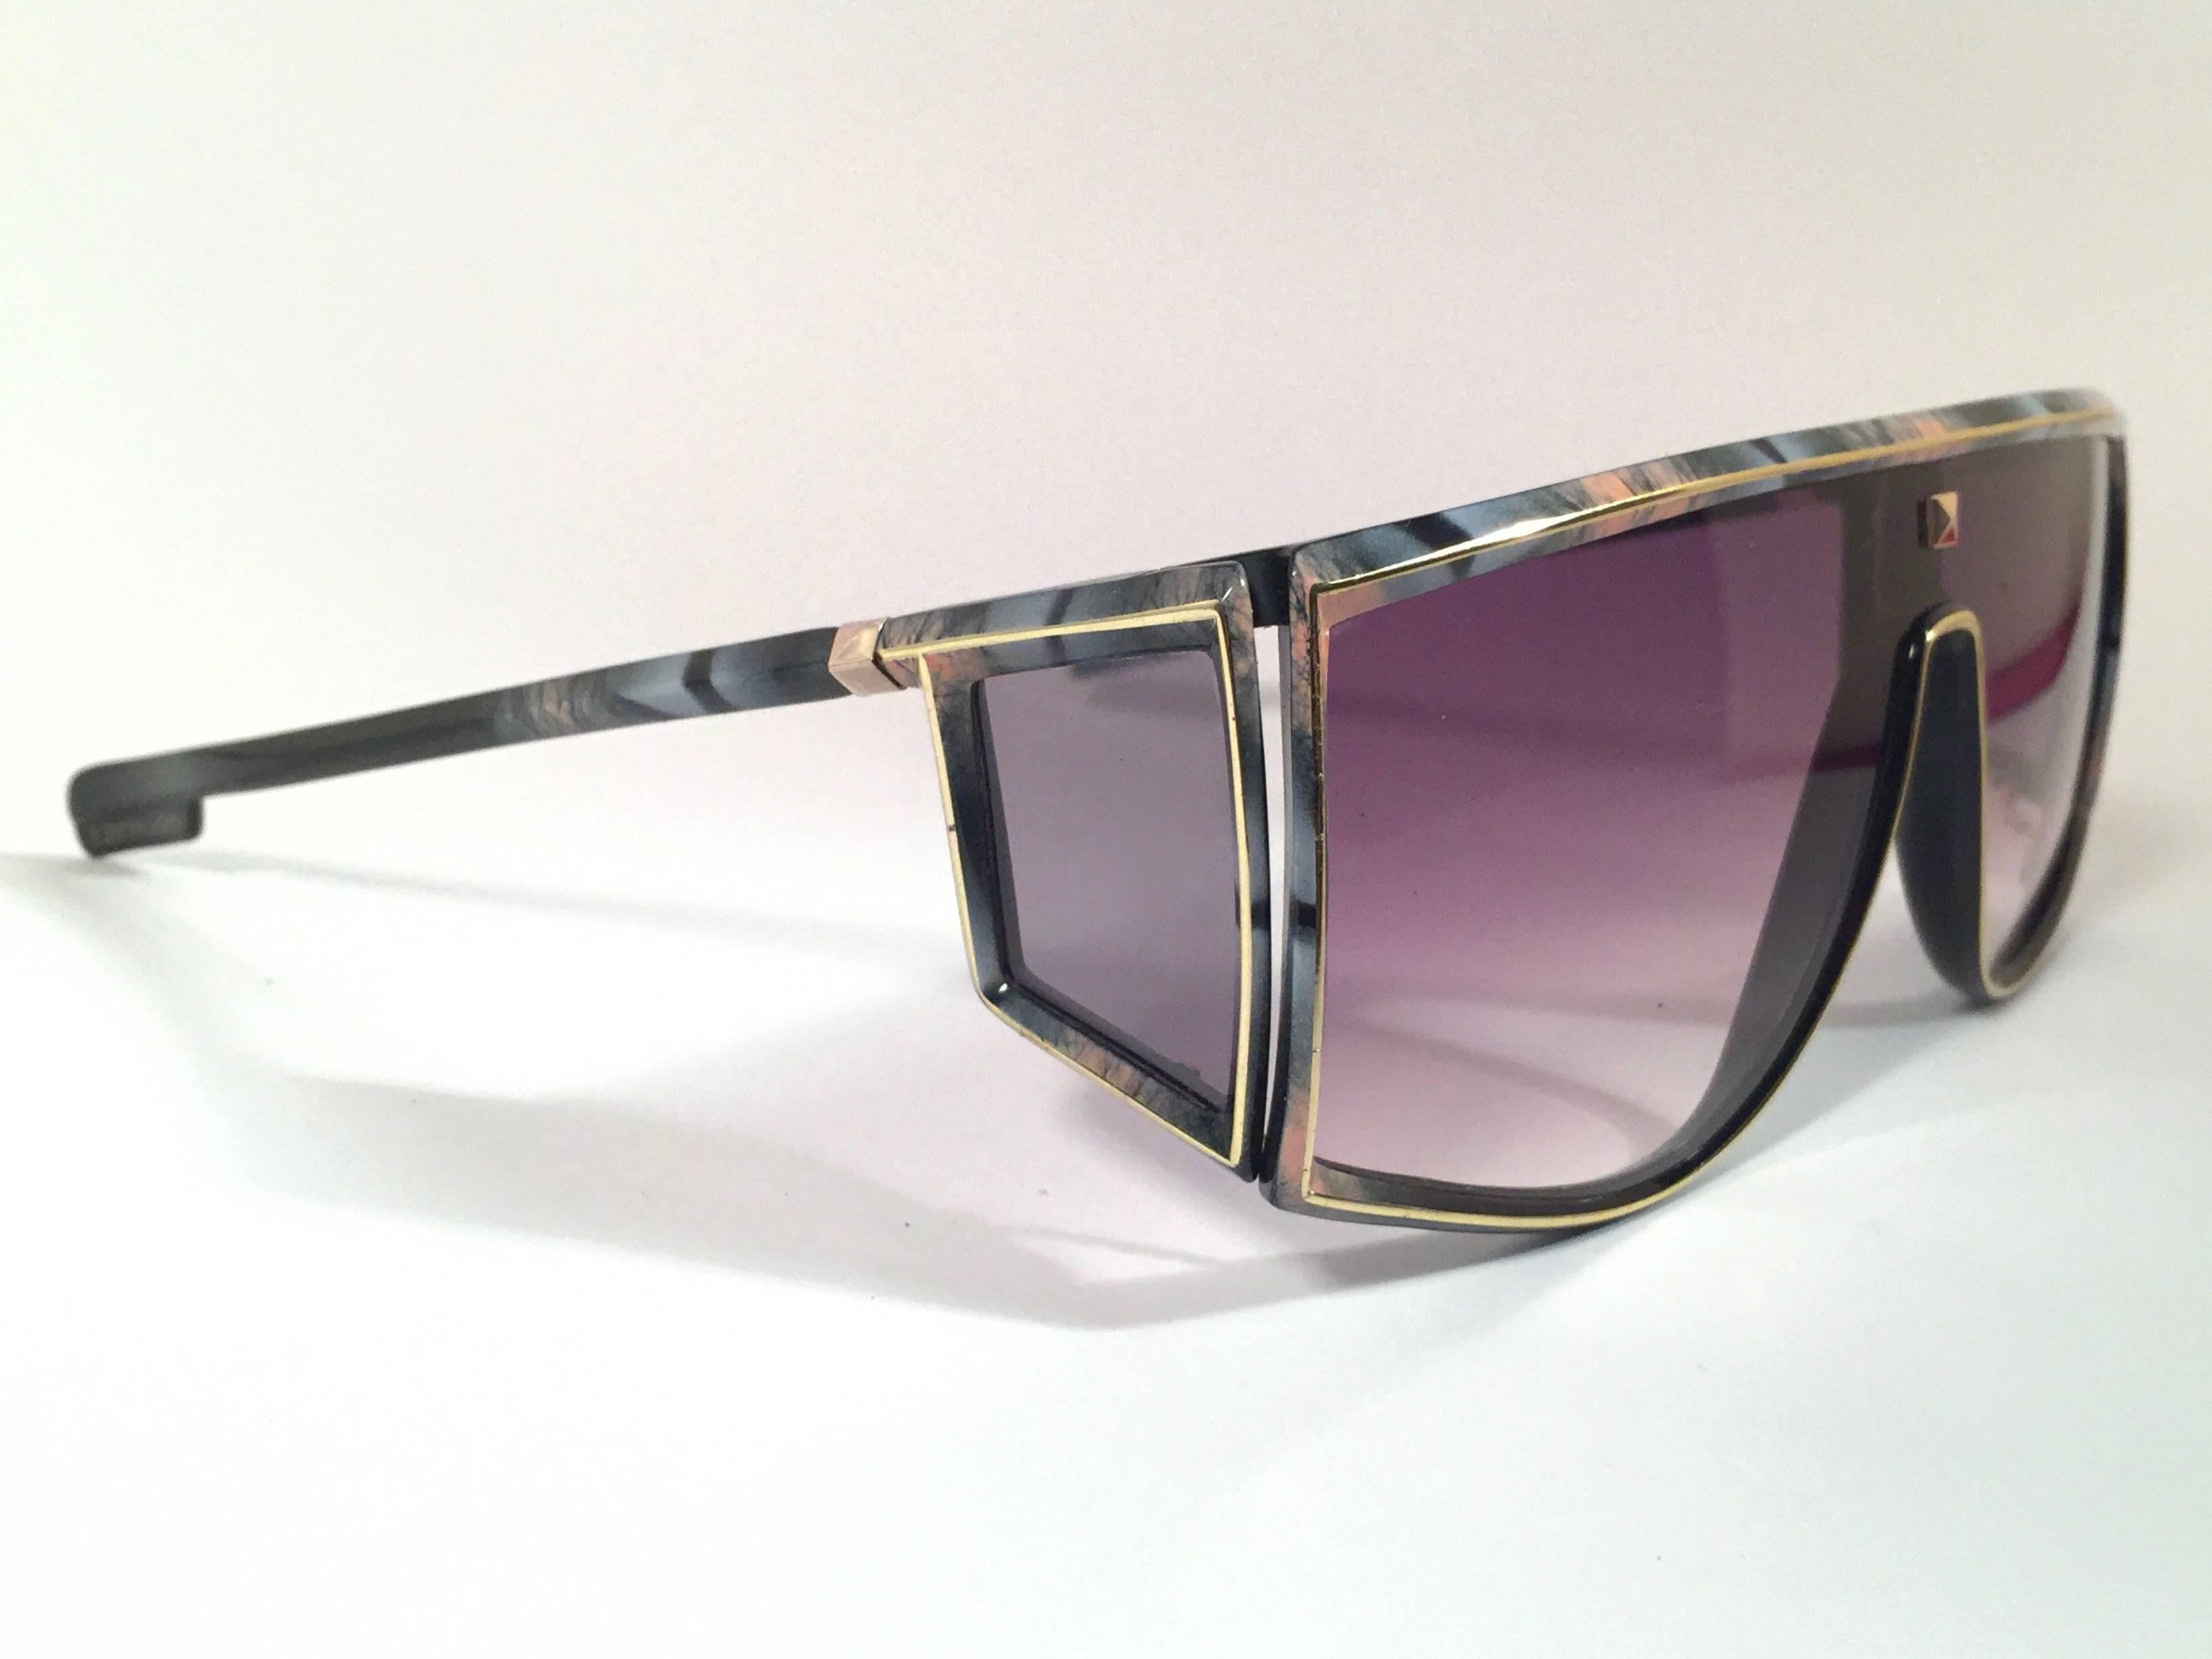 Rare pair of New vintage Leonard sunglasses.   
Sleek black with signature colours mosaic with gold accents mask frame holding a pair of rose gradient lenses.  
New, never worn or displayed. 
Made in France.